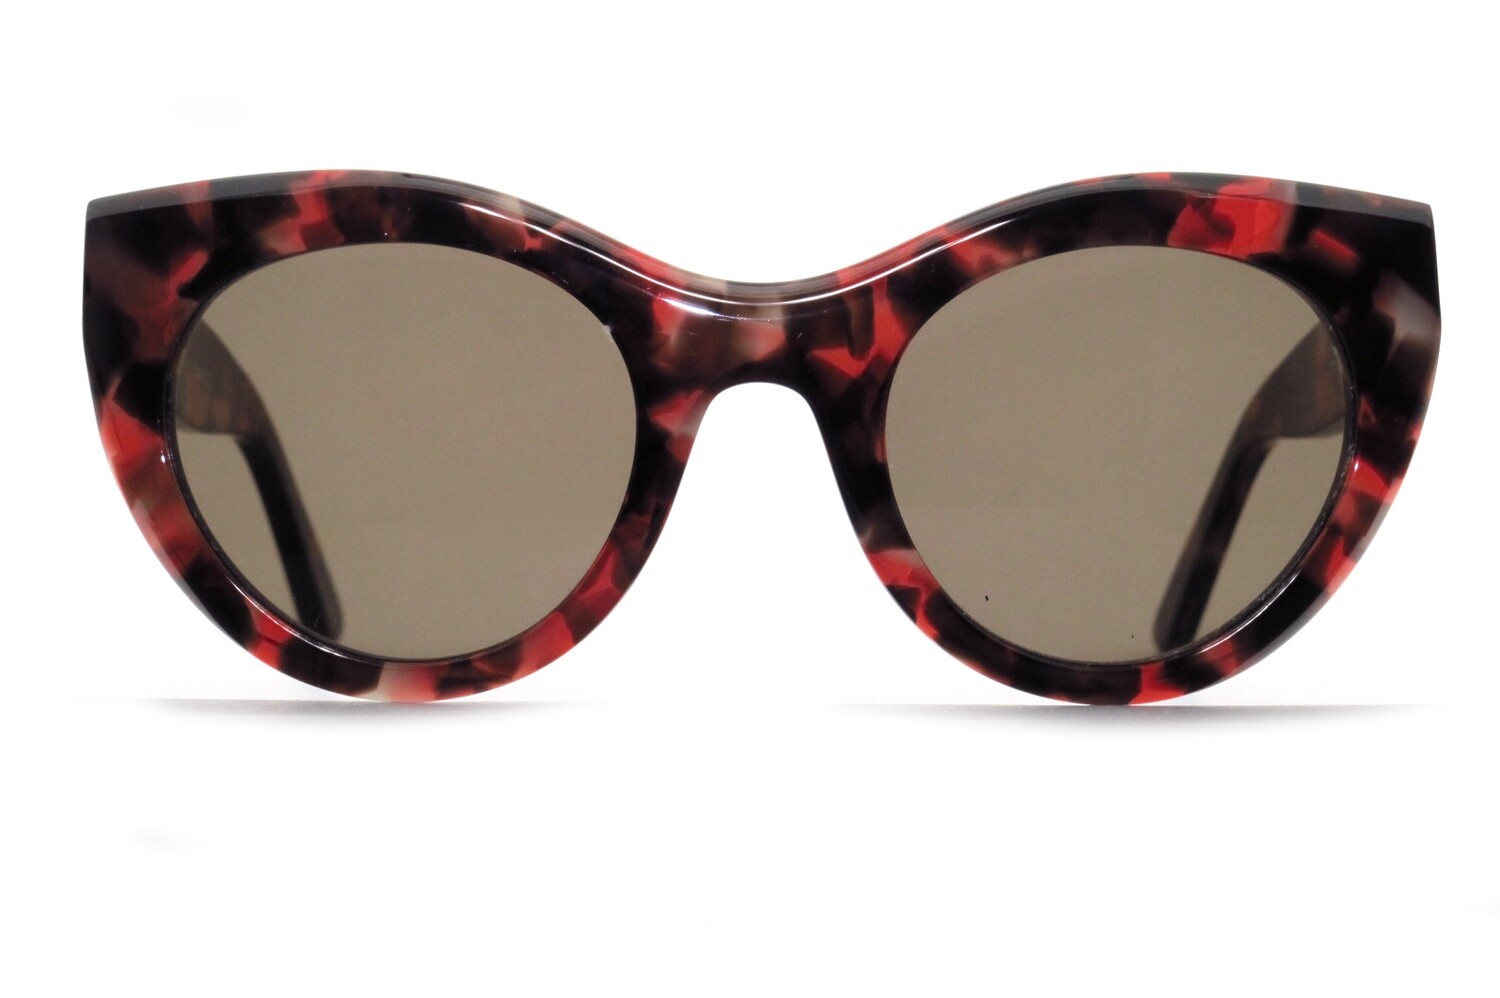 Demony by Thierry Lasry